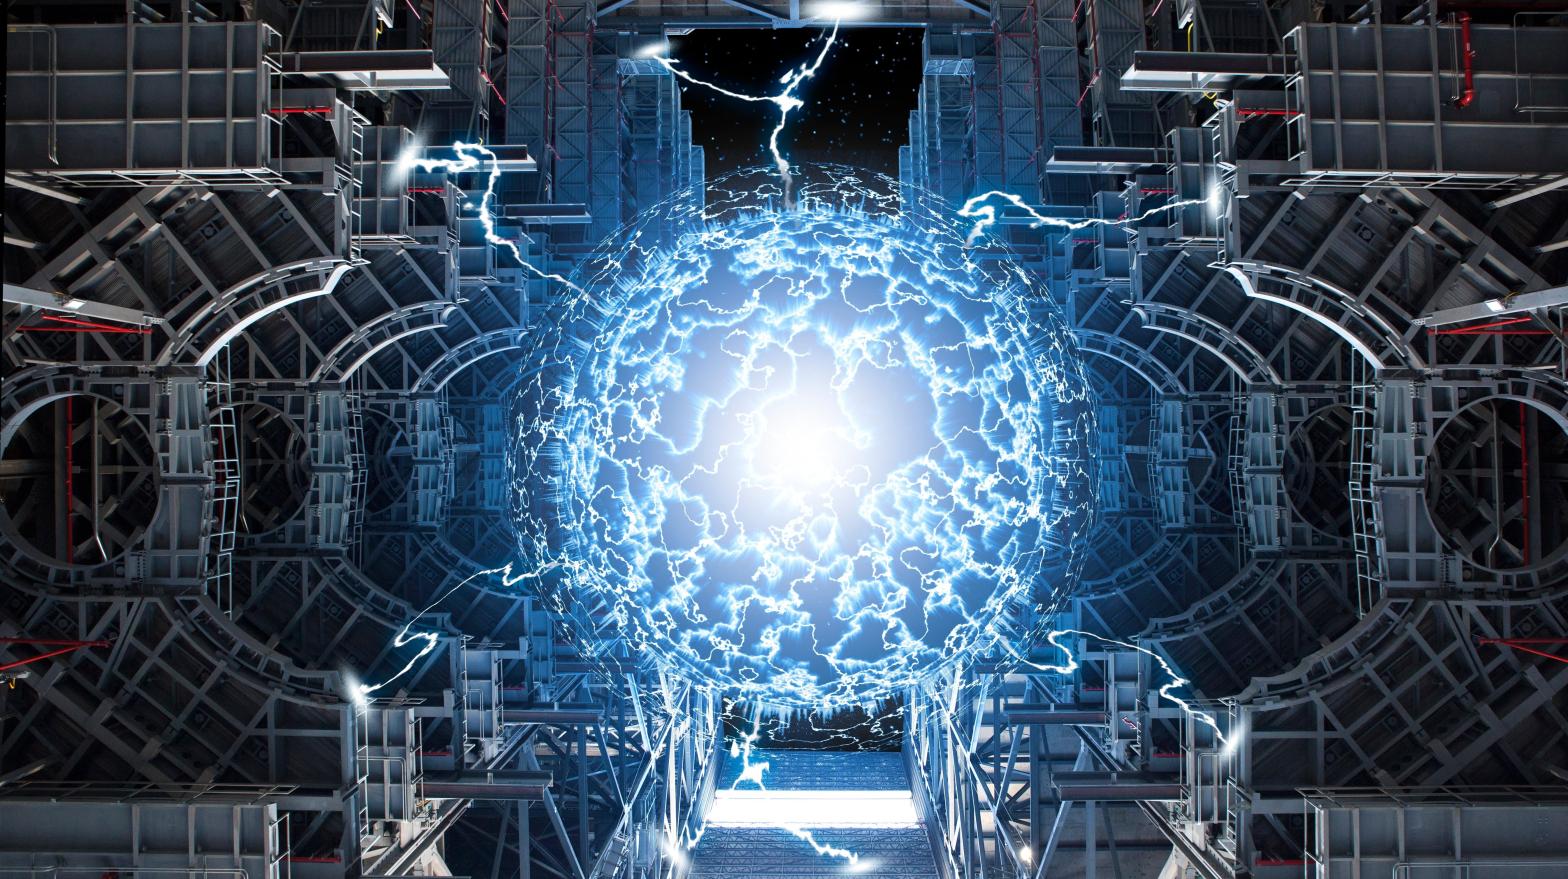 This is totally what nuclear fusion looks like, probably. (Photo: hallowhalls, Shutterstock)